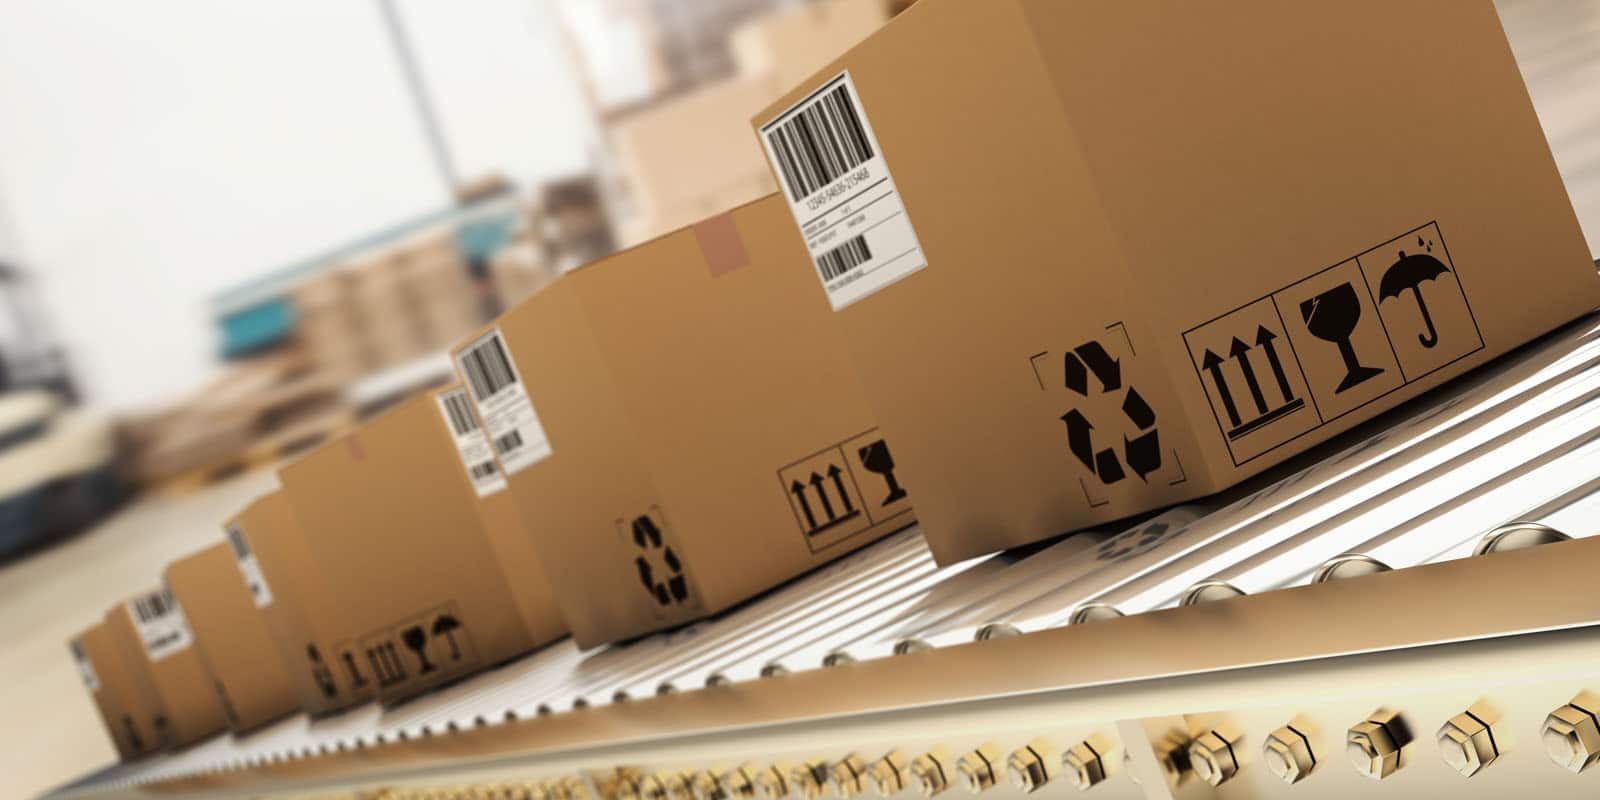 Manufacturers’ Top 3 Concerns About Traditional Distribution Channels